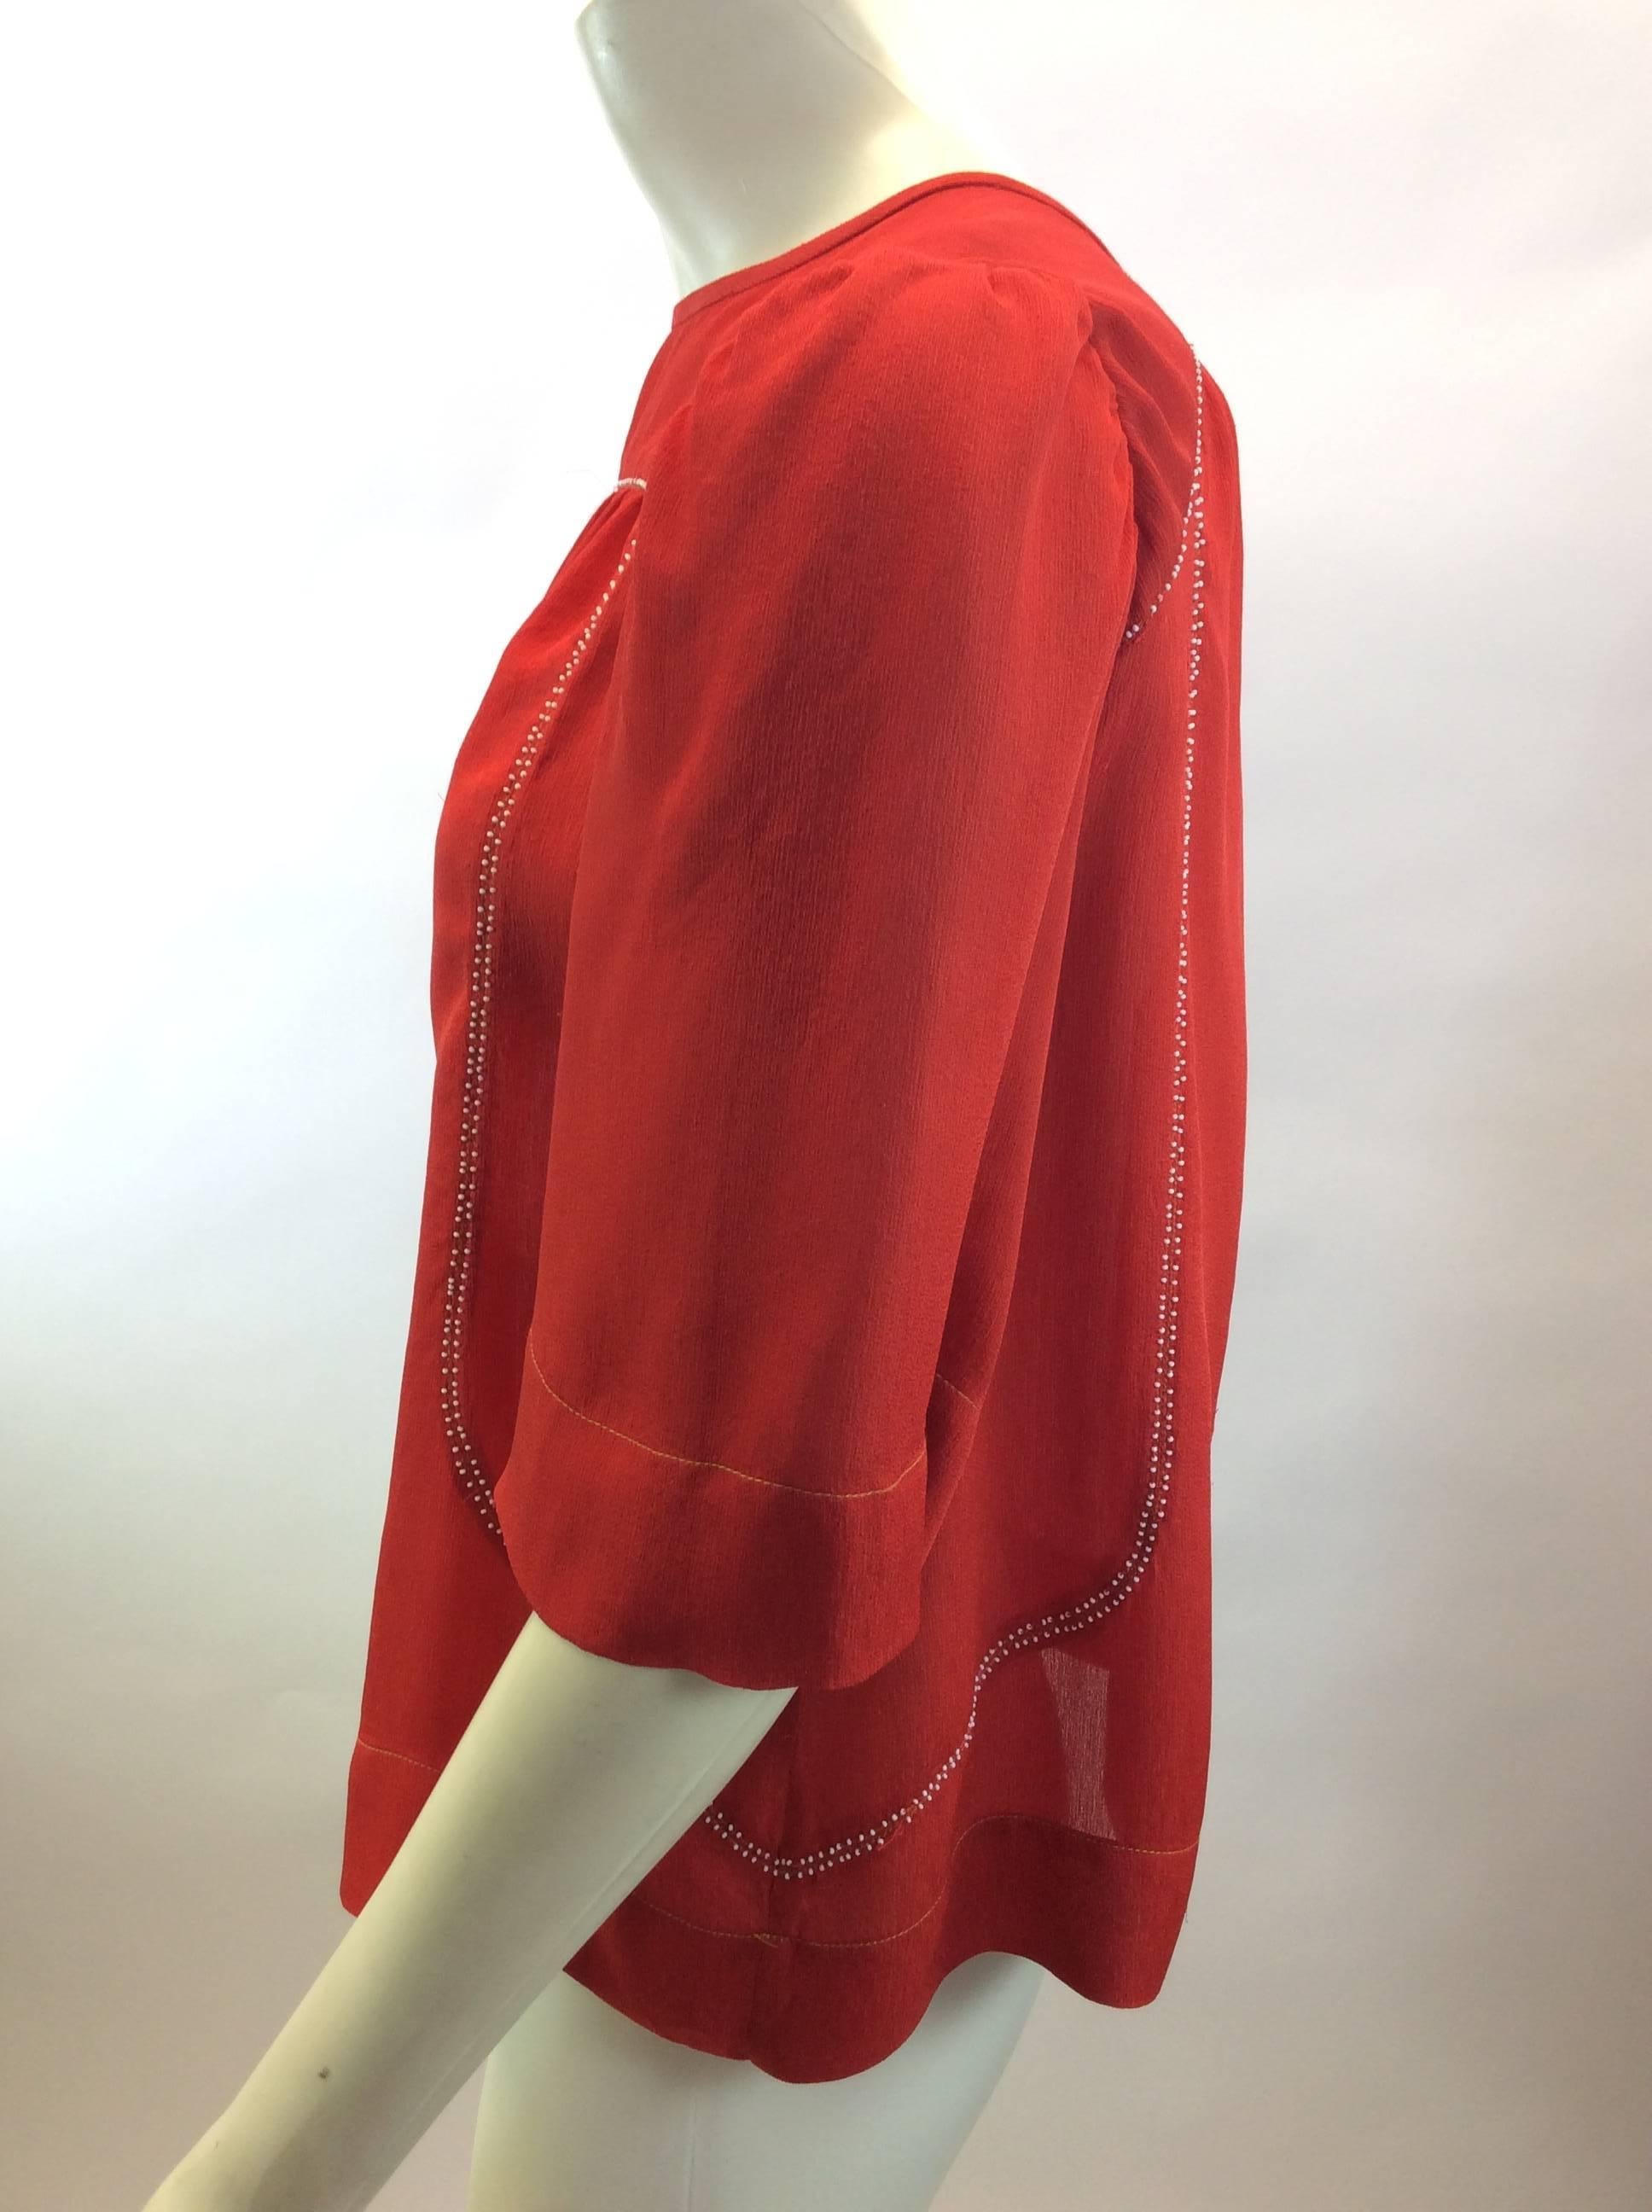 Isabel Marant Red Silk Blouse
$65
100% Silk
Made in India
Size 36
Length 21